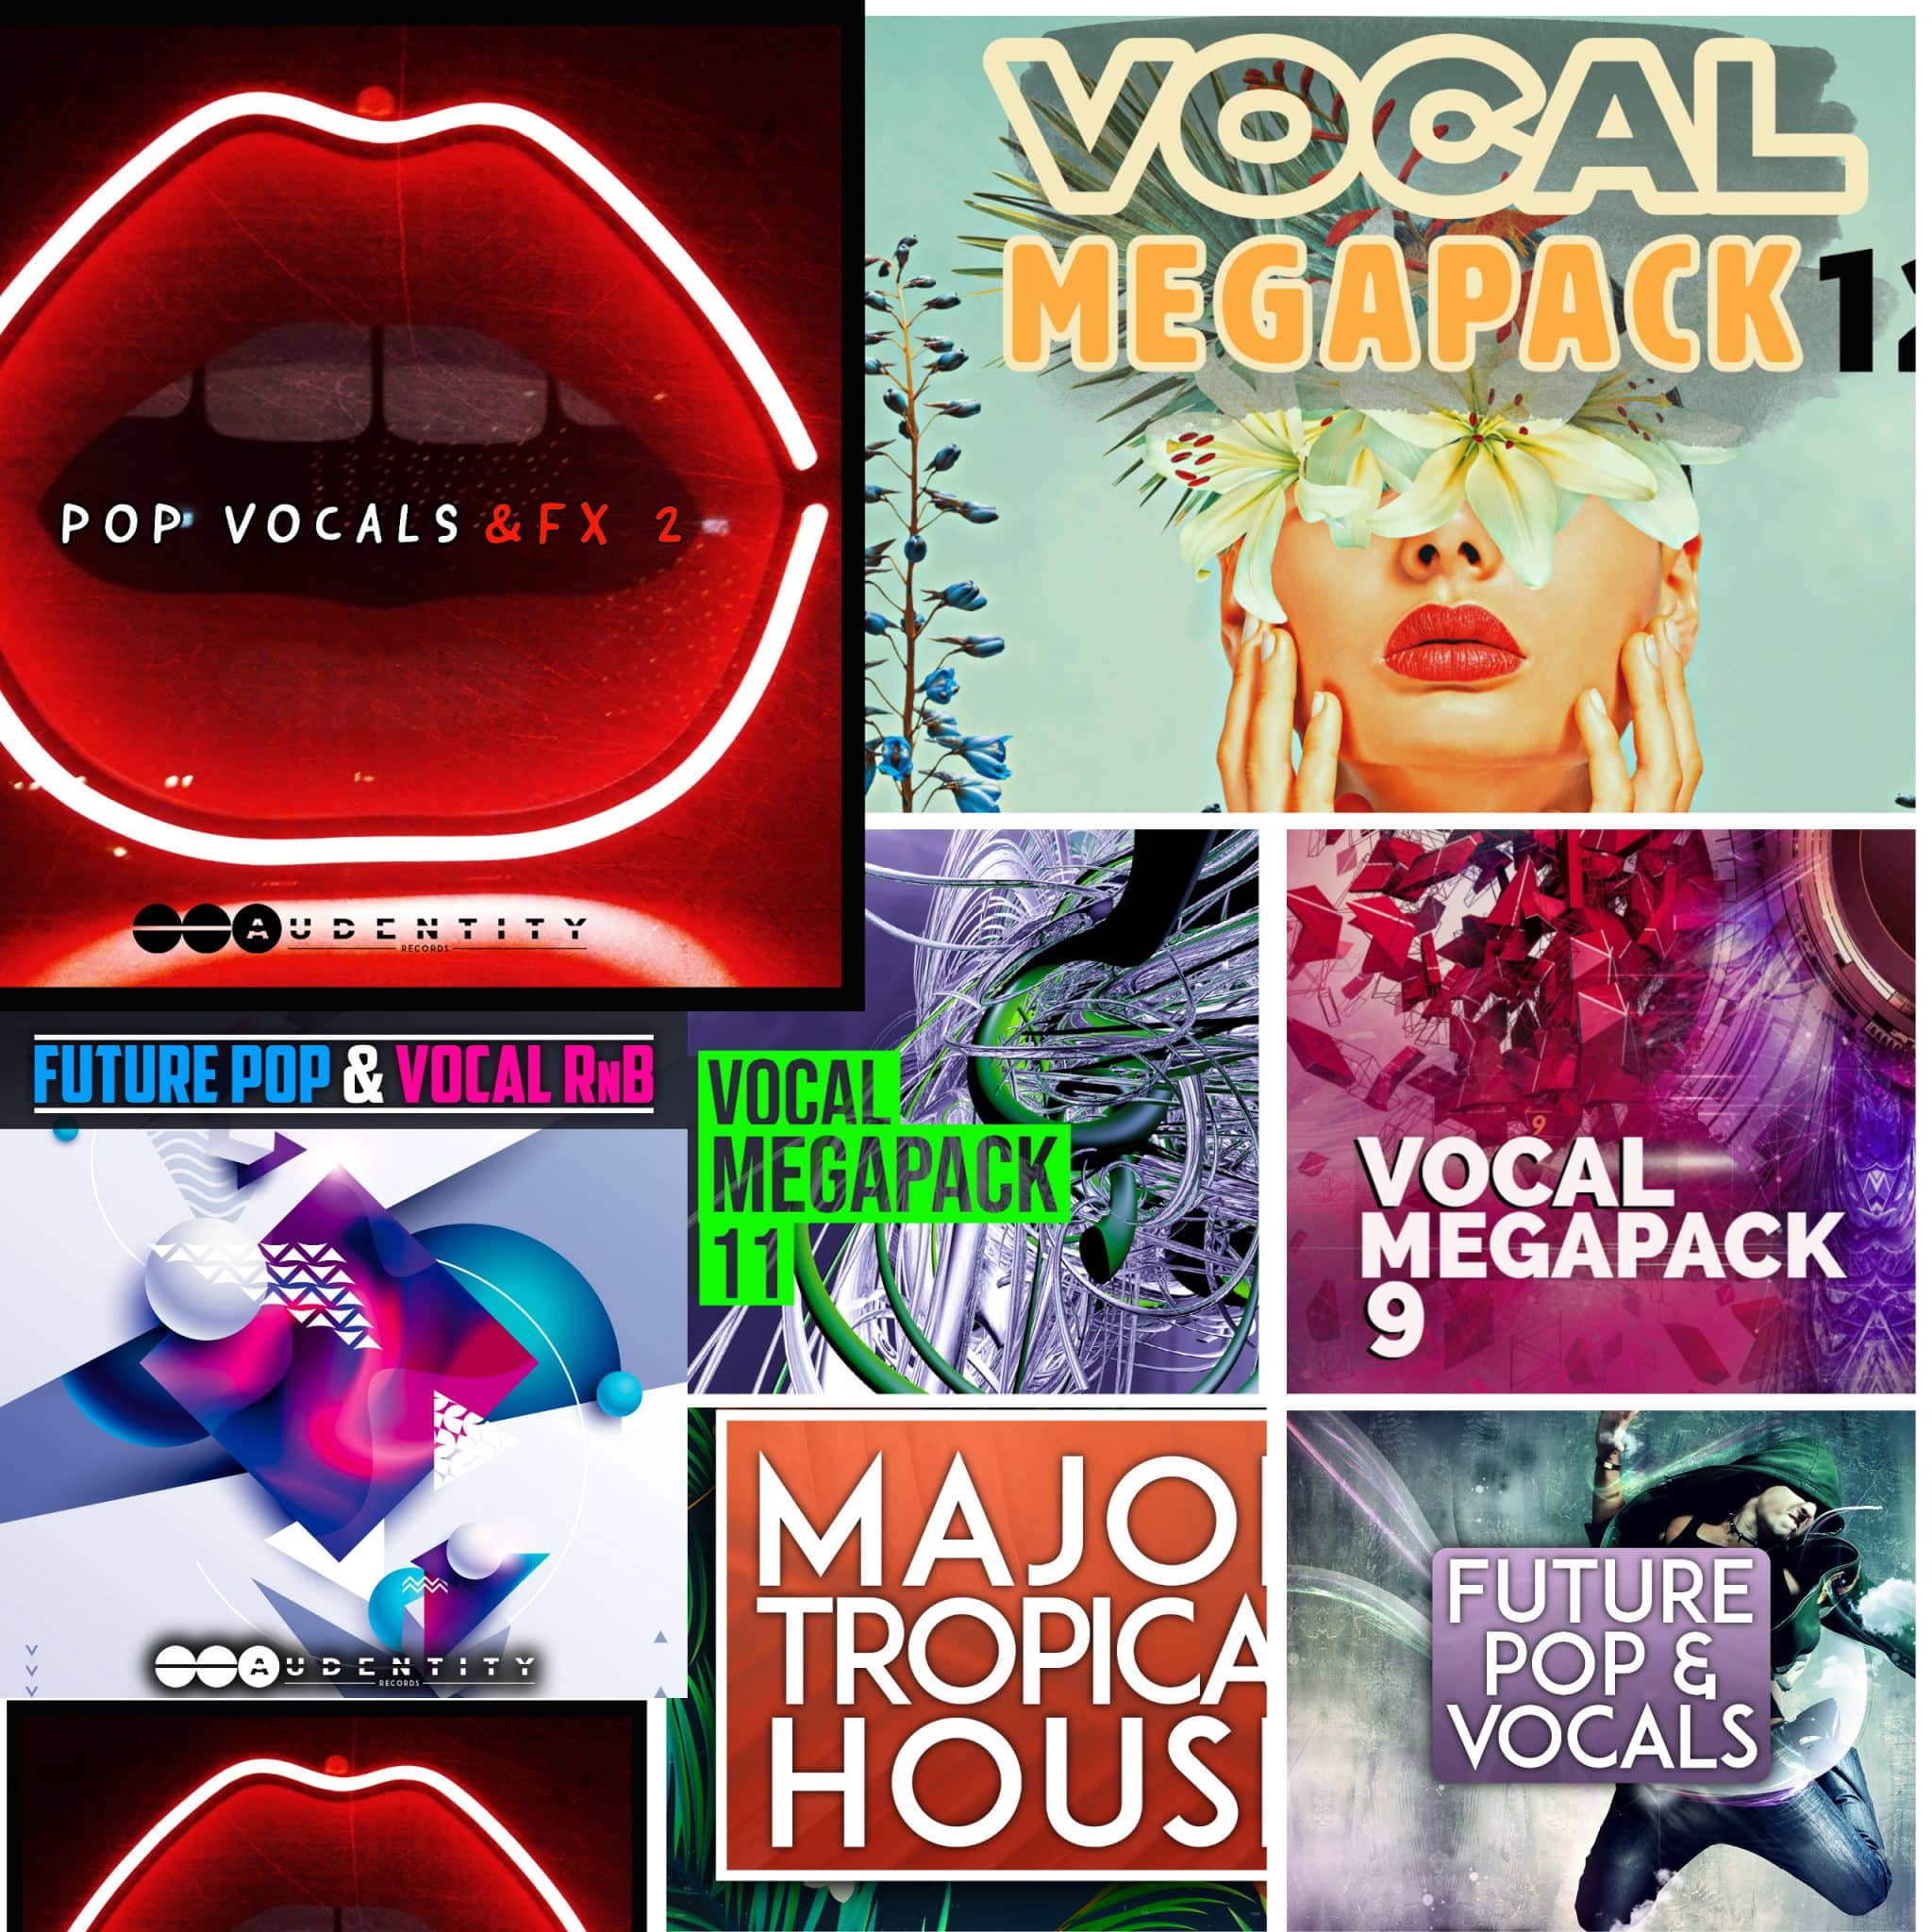 84% off “Vocal Production Bundle” by Audentity Records